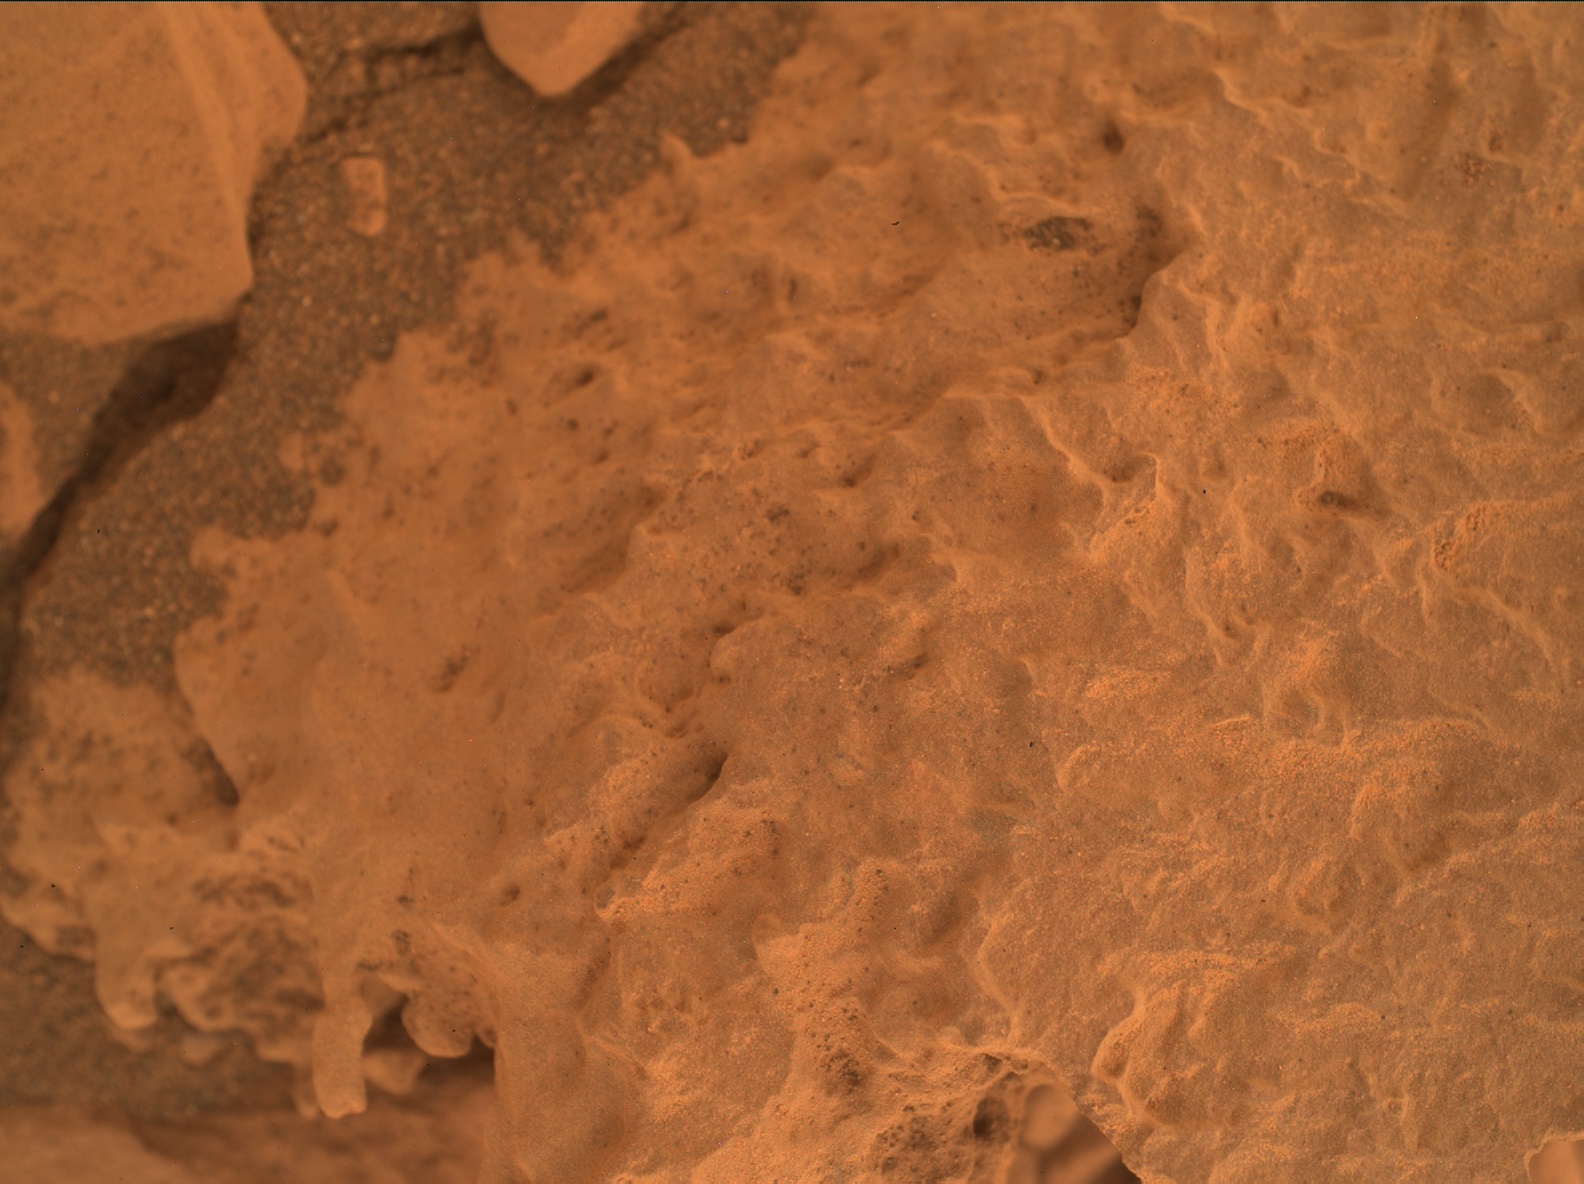 Nasa's Mars rover Curiosity acquired this image using its Mars Hand Lens Imager (MAHLI) on Sol 2107